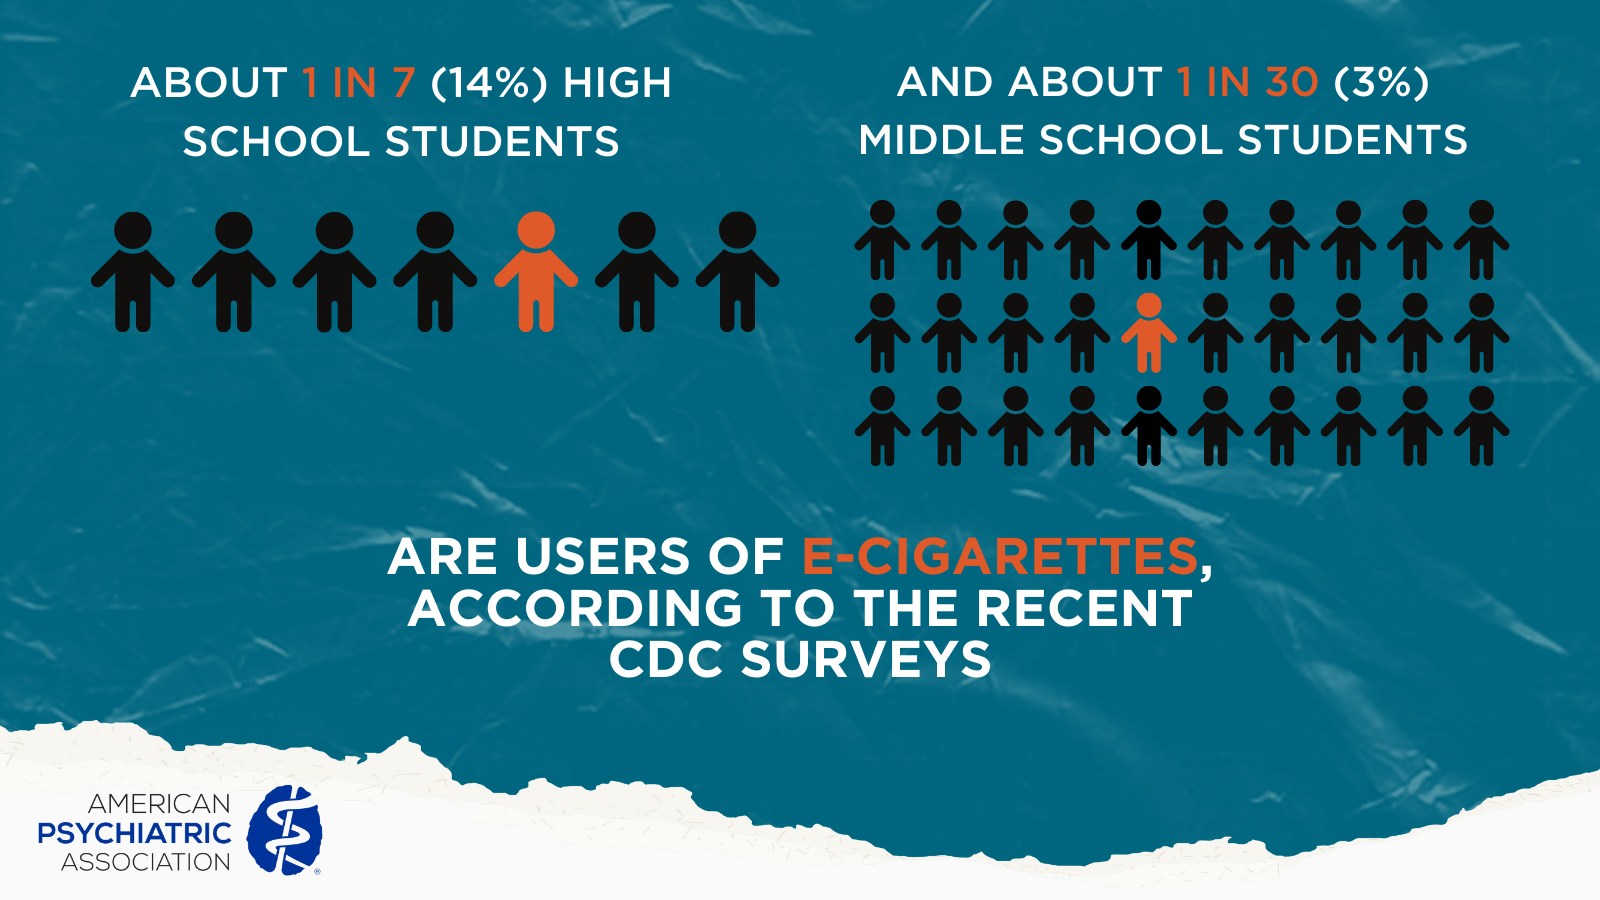 About 1 in 7 high school students and 1 in 30 middle school students are users of e-cigarettes according to CDC